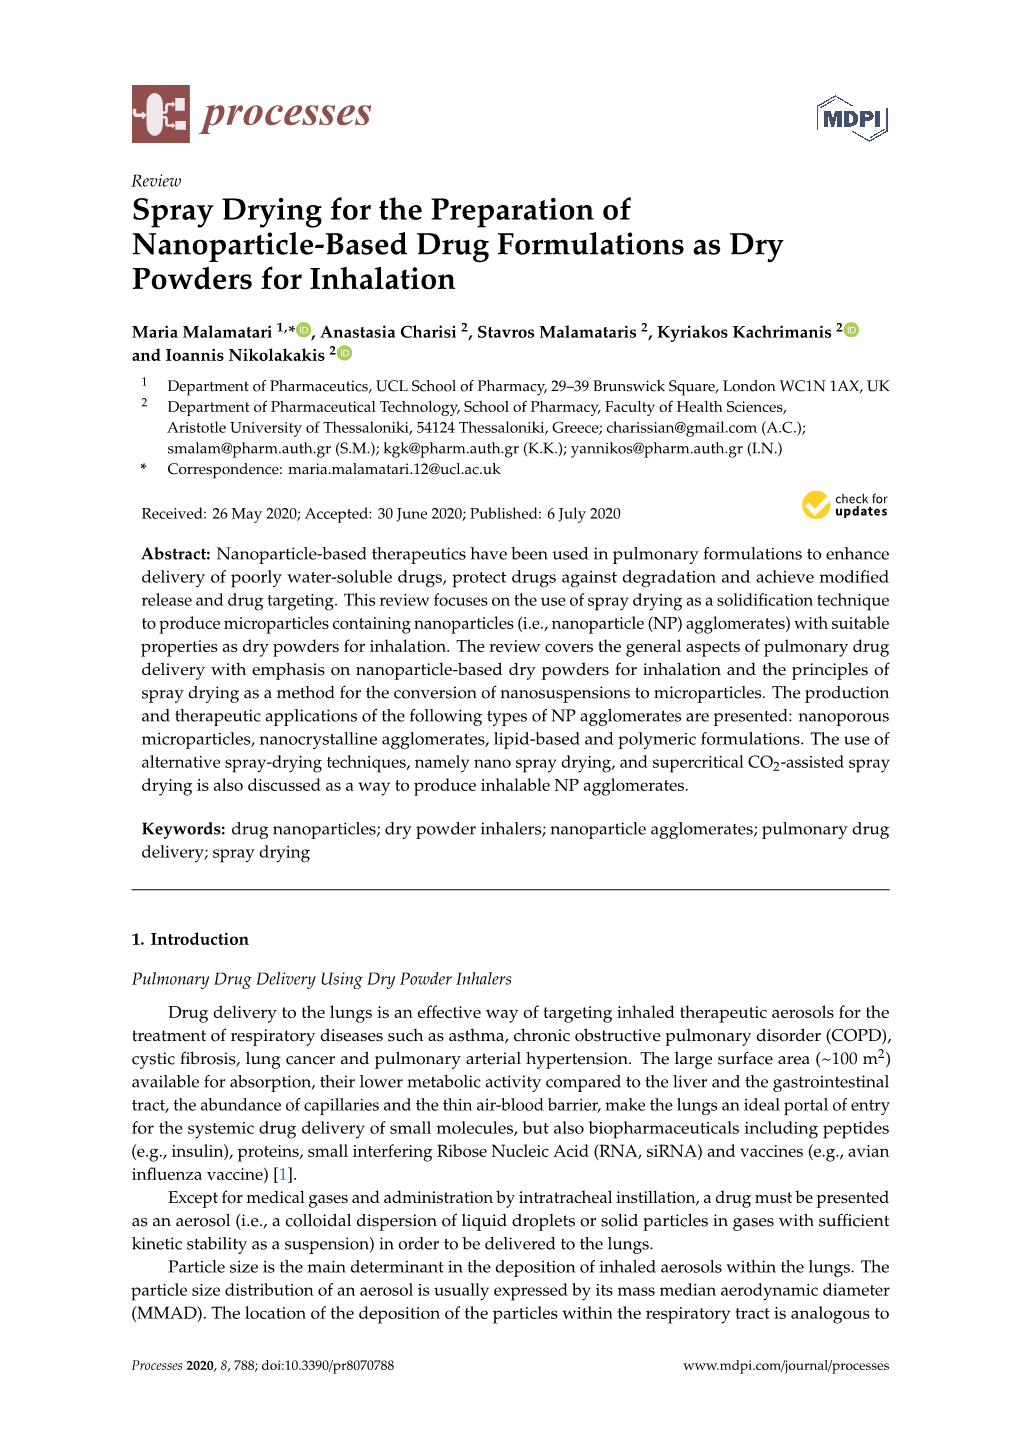 Spray Drying for the Preparation of Nanoparticle-Based Drug Formulations As Dry Powders for Inhalation